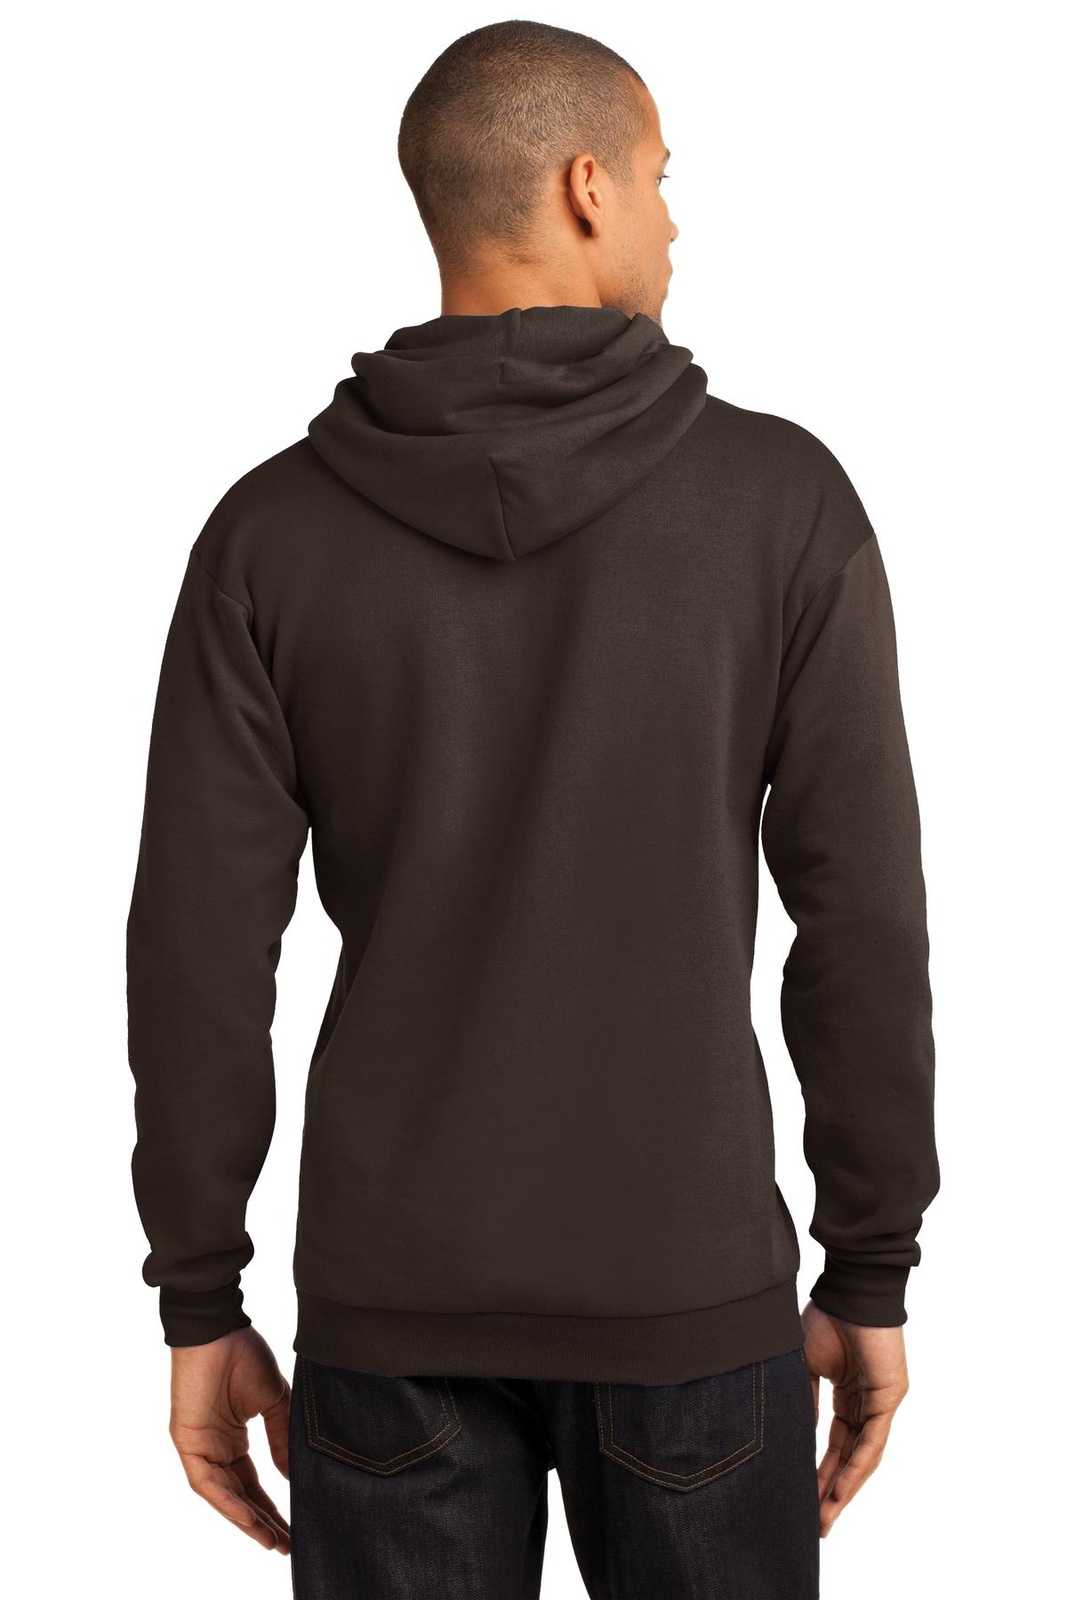 Port &amp; Company PC78H Core Fleece Pullover Hooded Sweatshirt - Dark Chocolate Brown - HIT a Double - 2